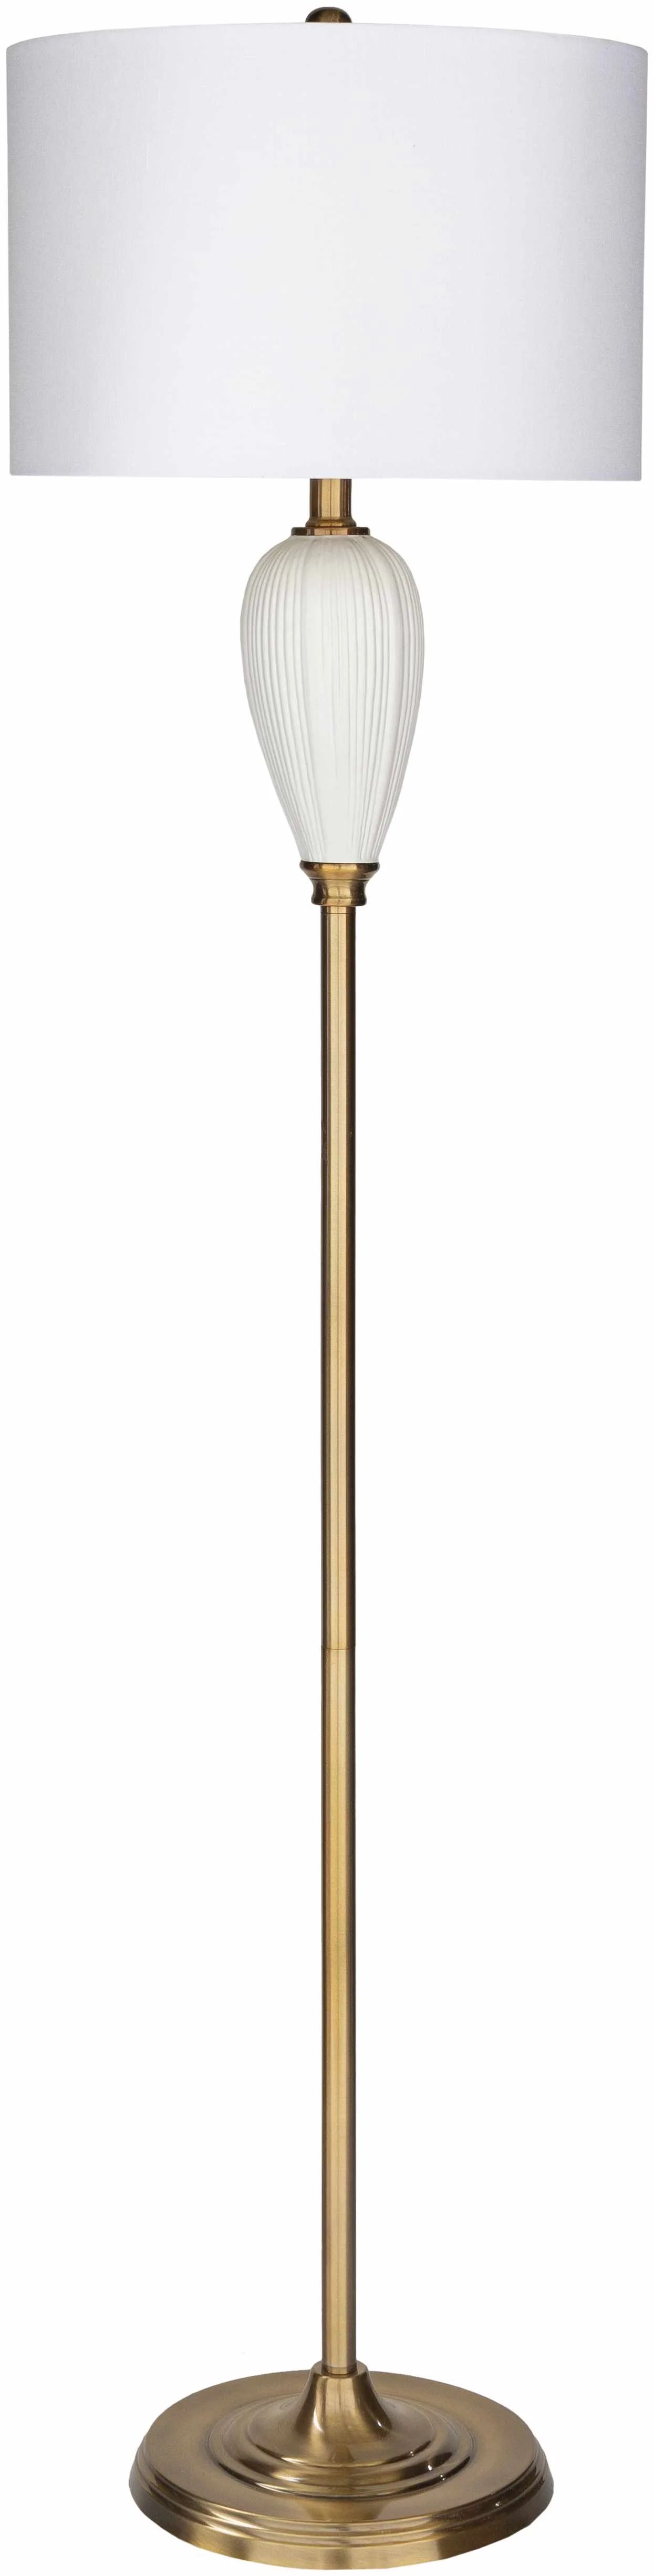 Winifrede Floor Lamp | Boutique Rugs